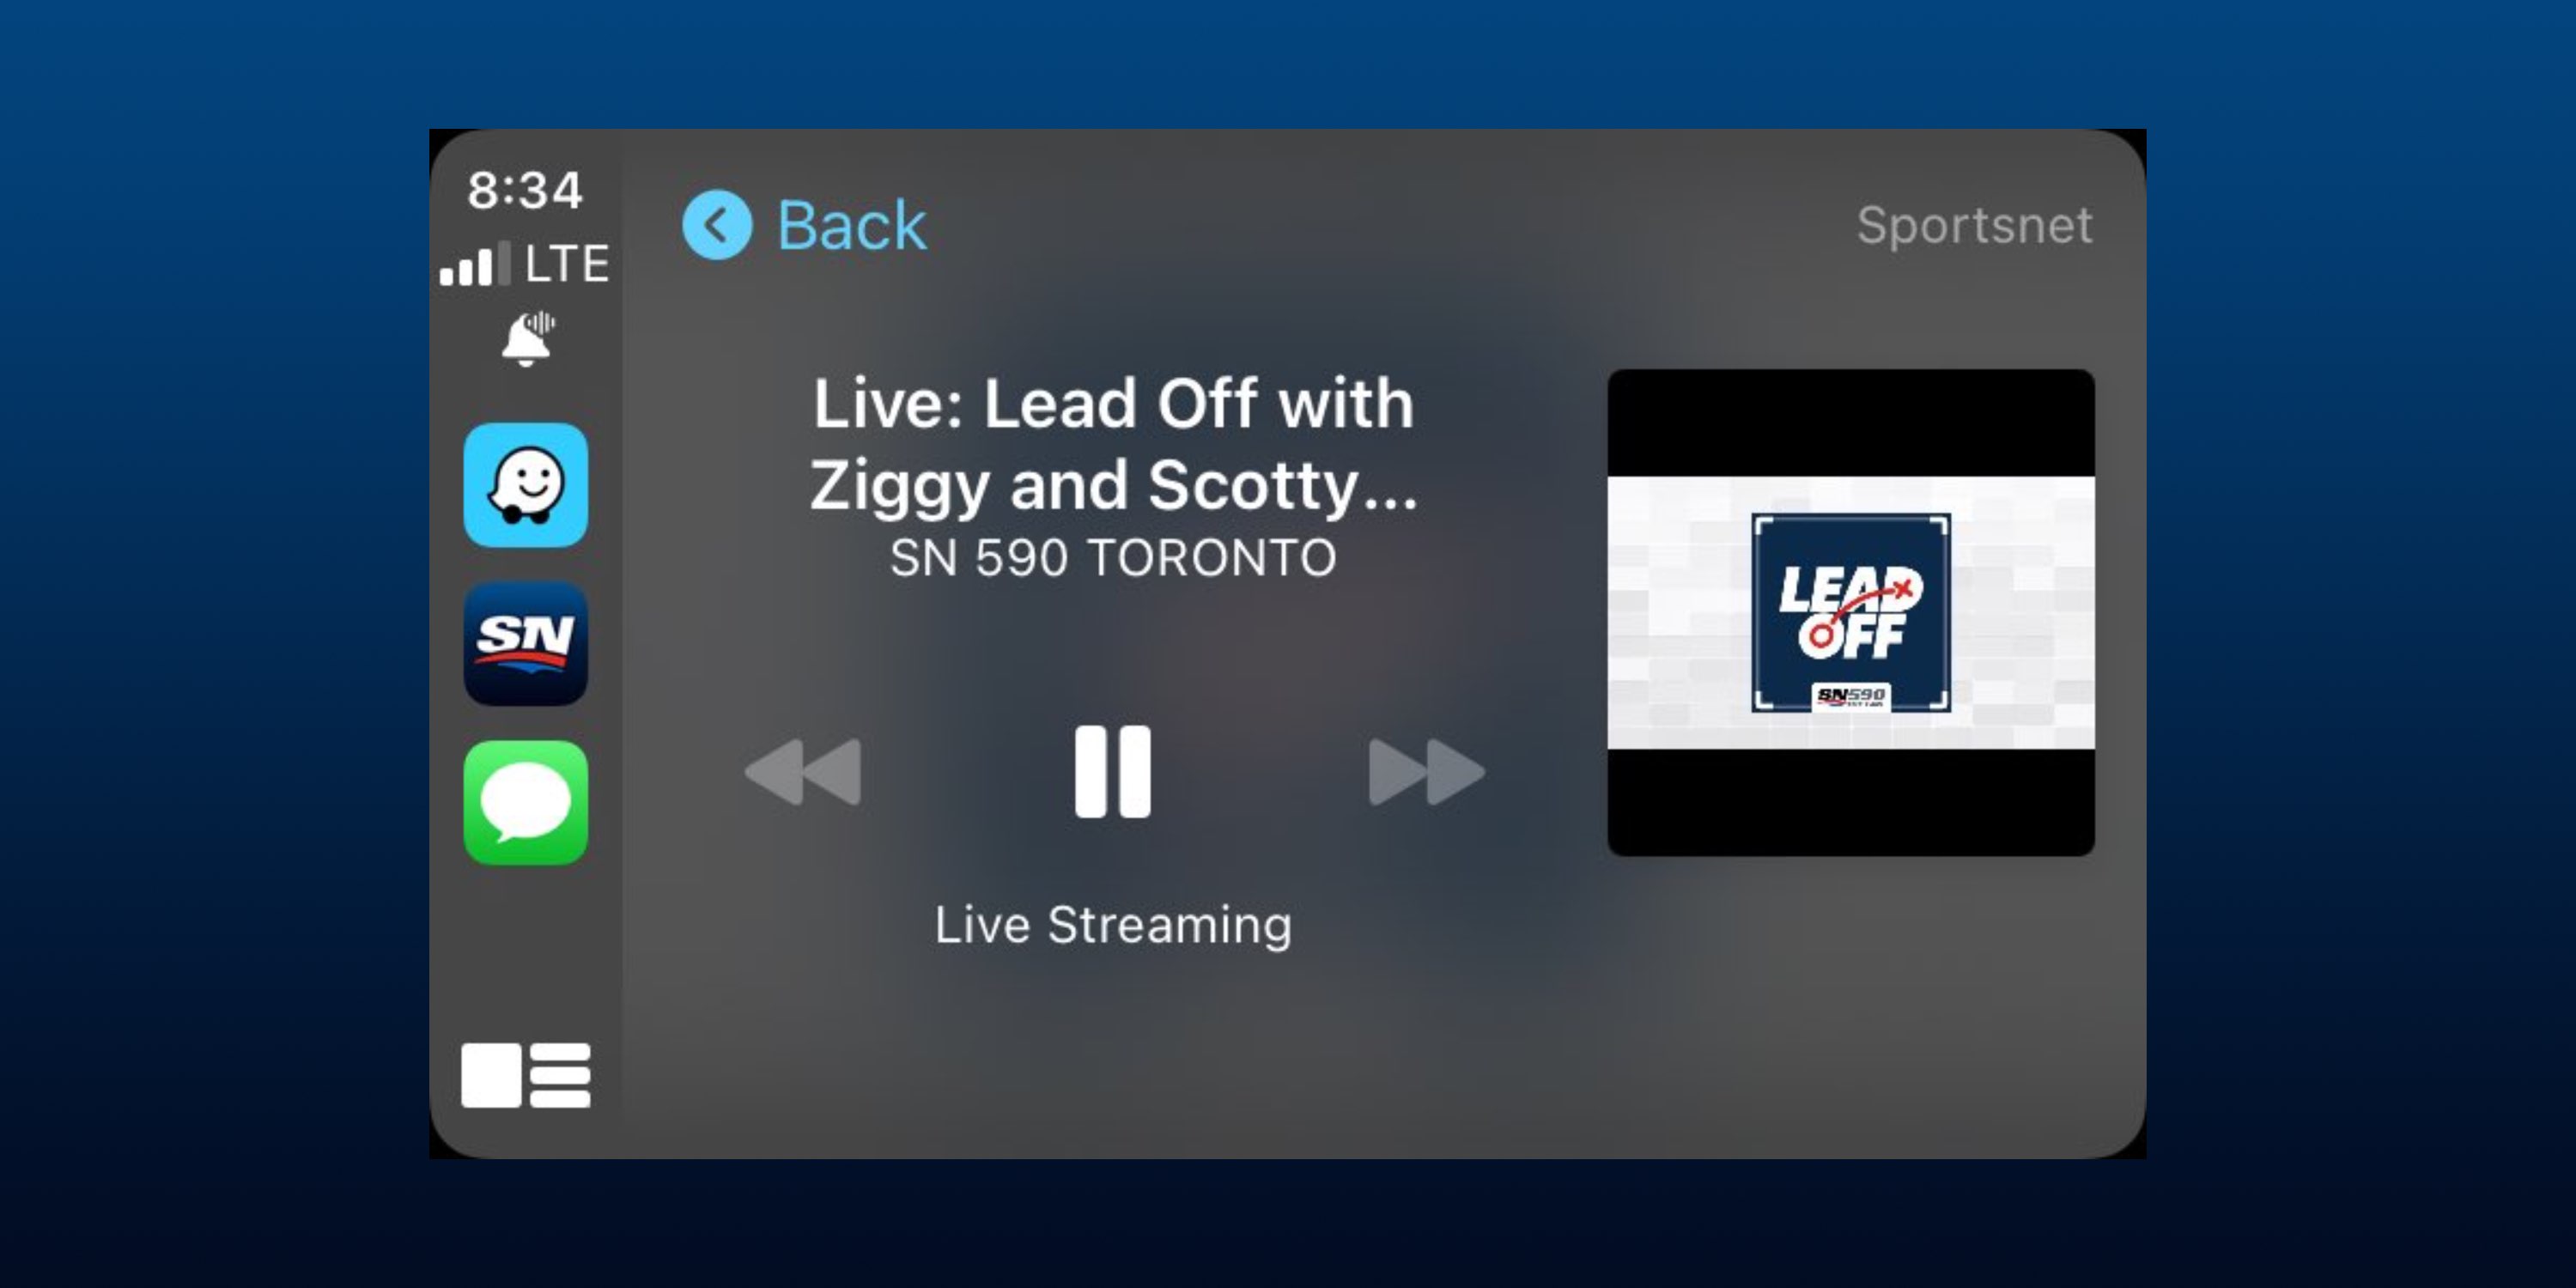 Sportsnet for iOS adds dedicated CarPlay app with live streaming and more